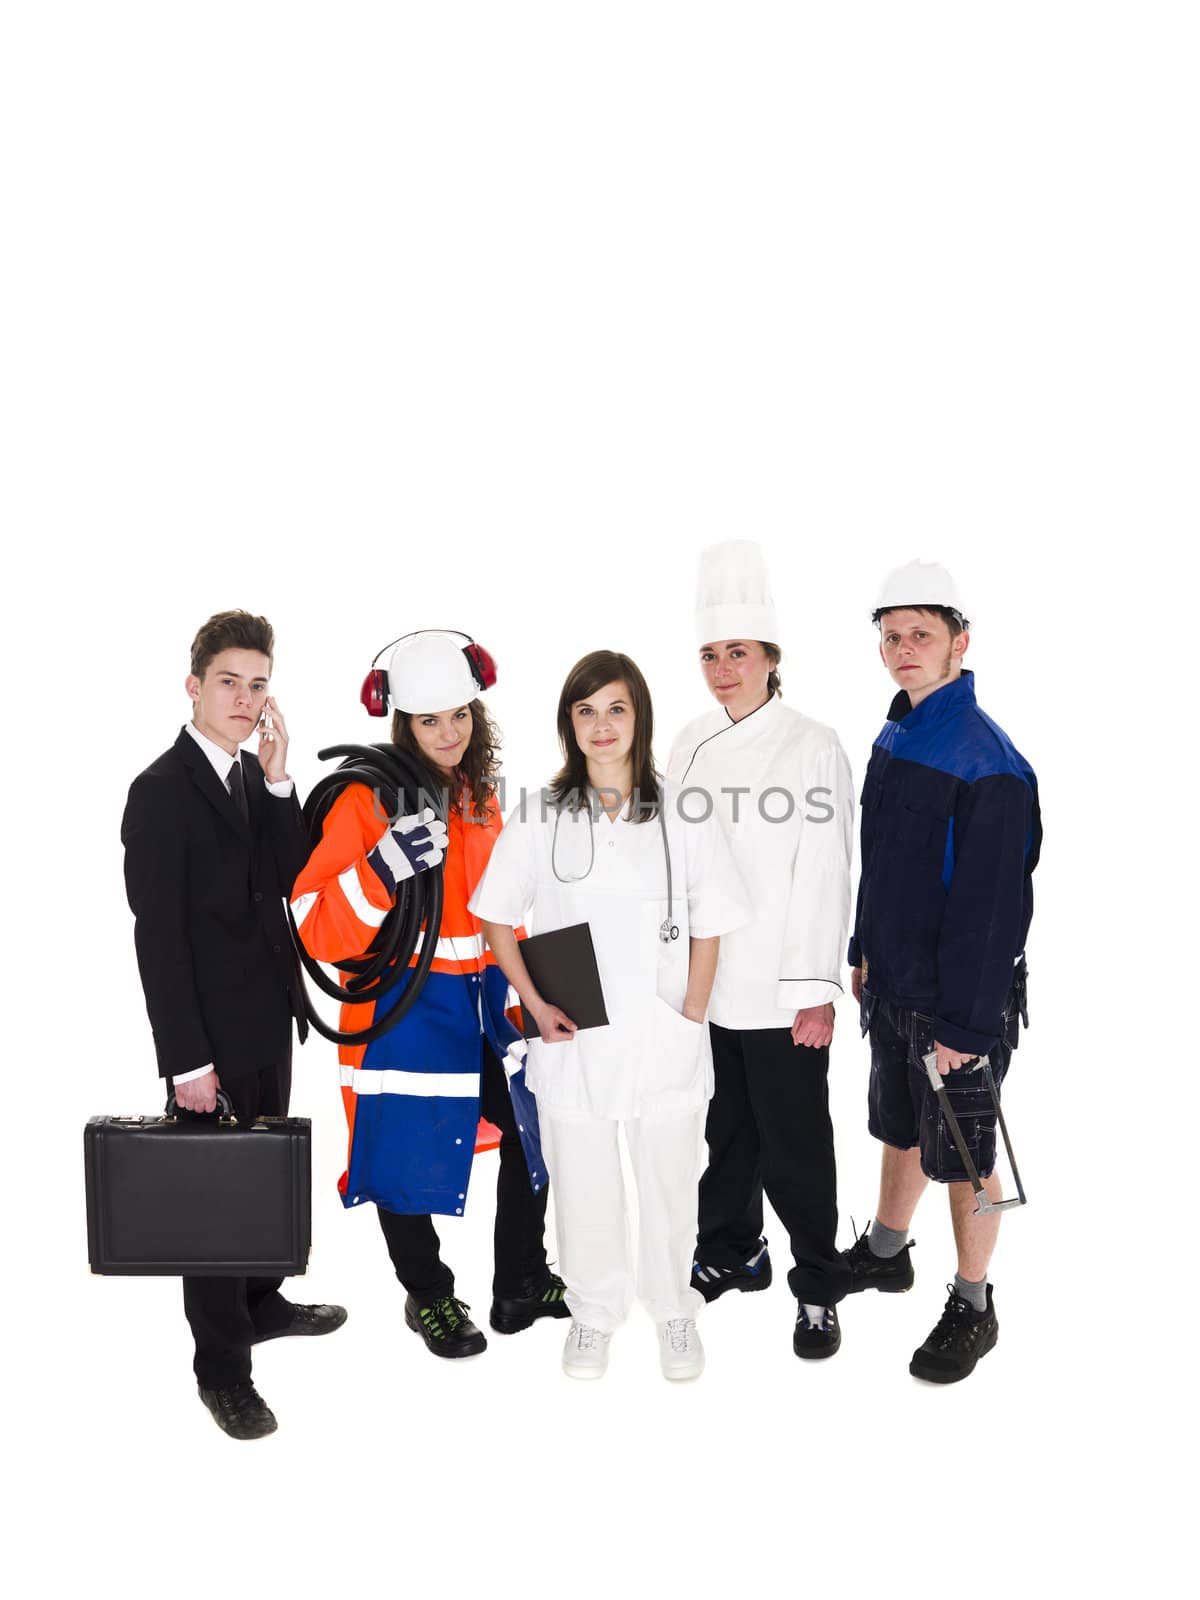 Group of people with different occupations isolated on white background